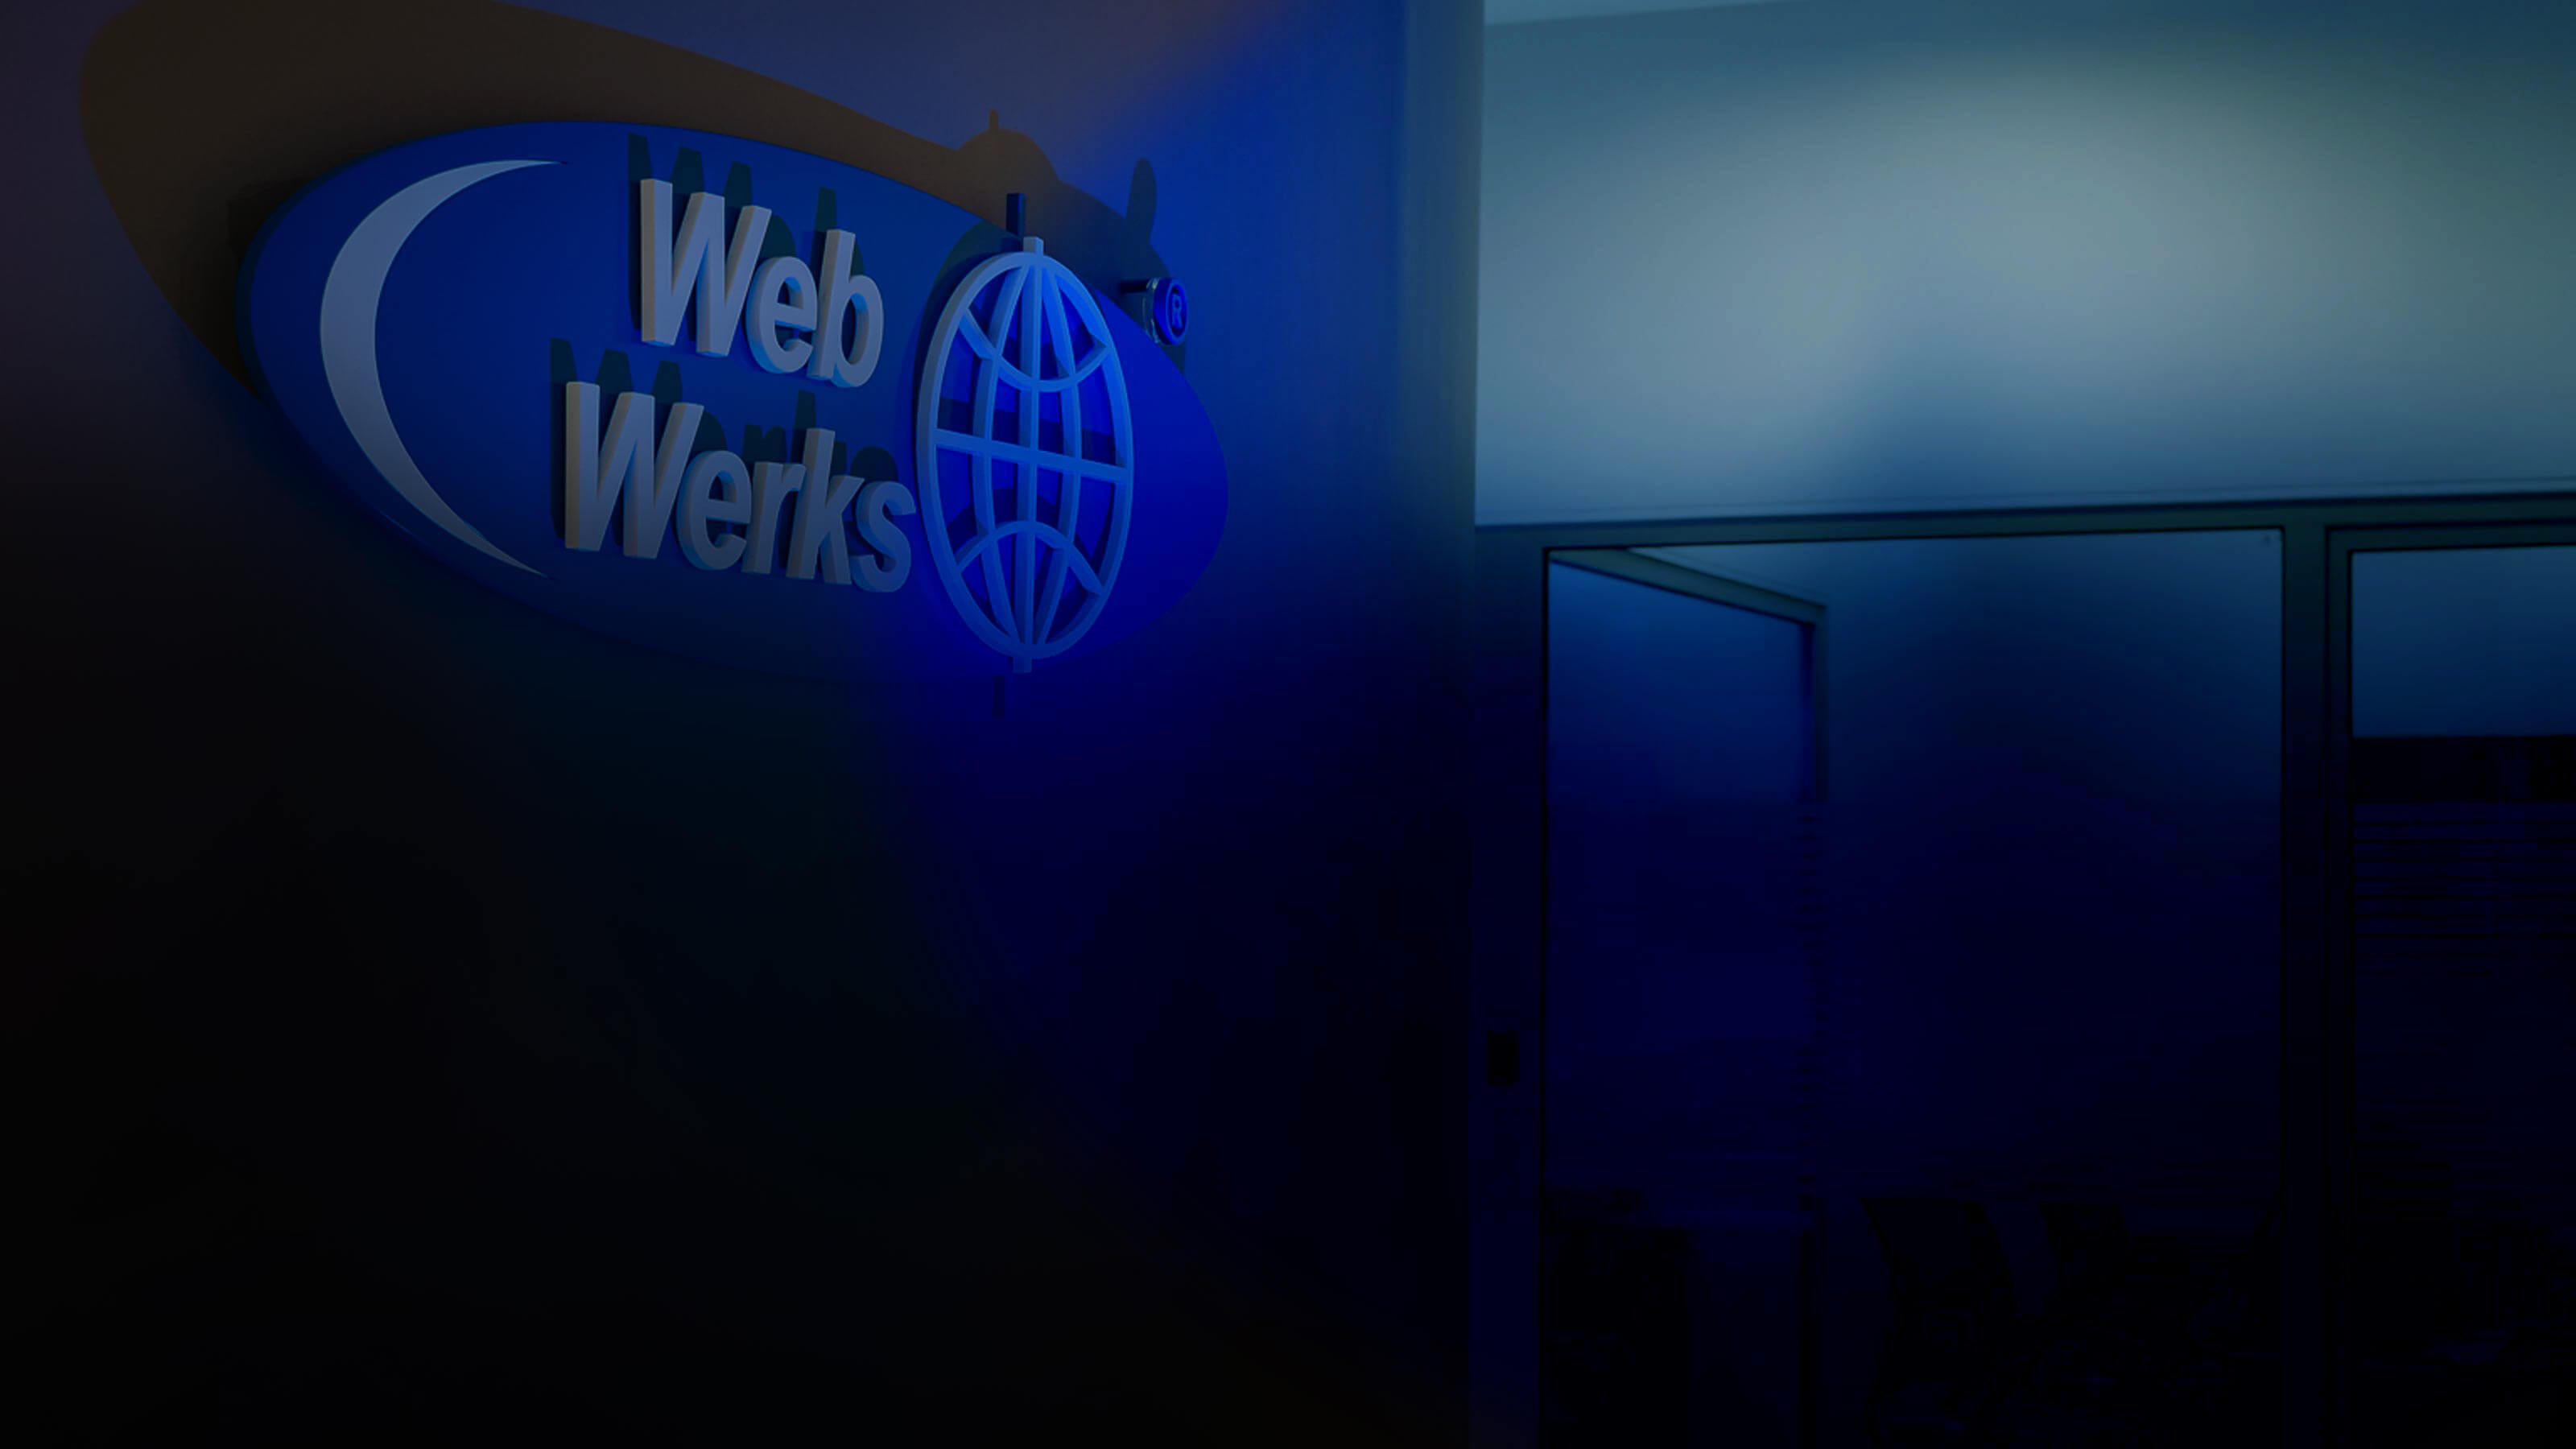 About Web Werks